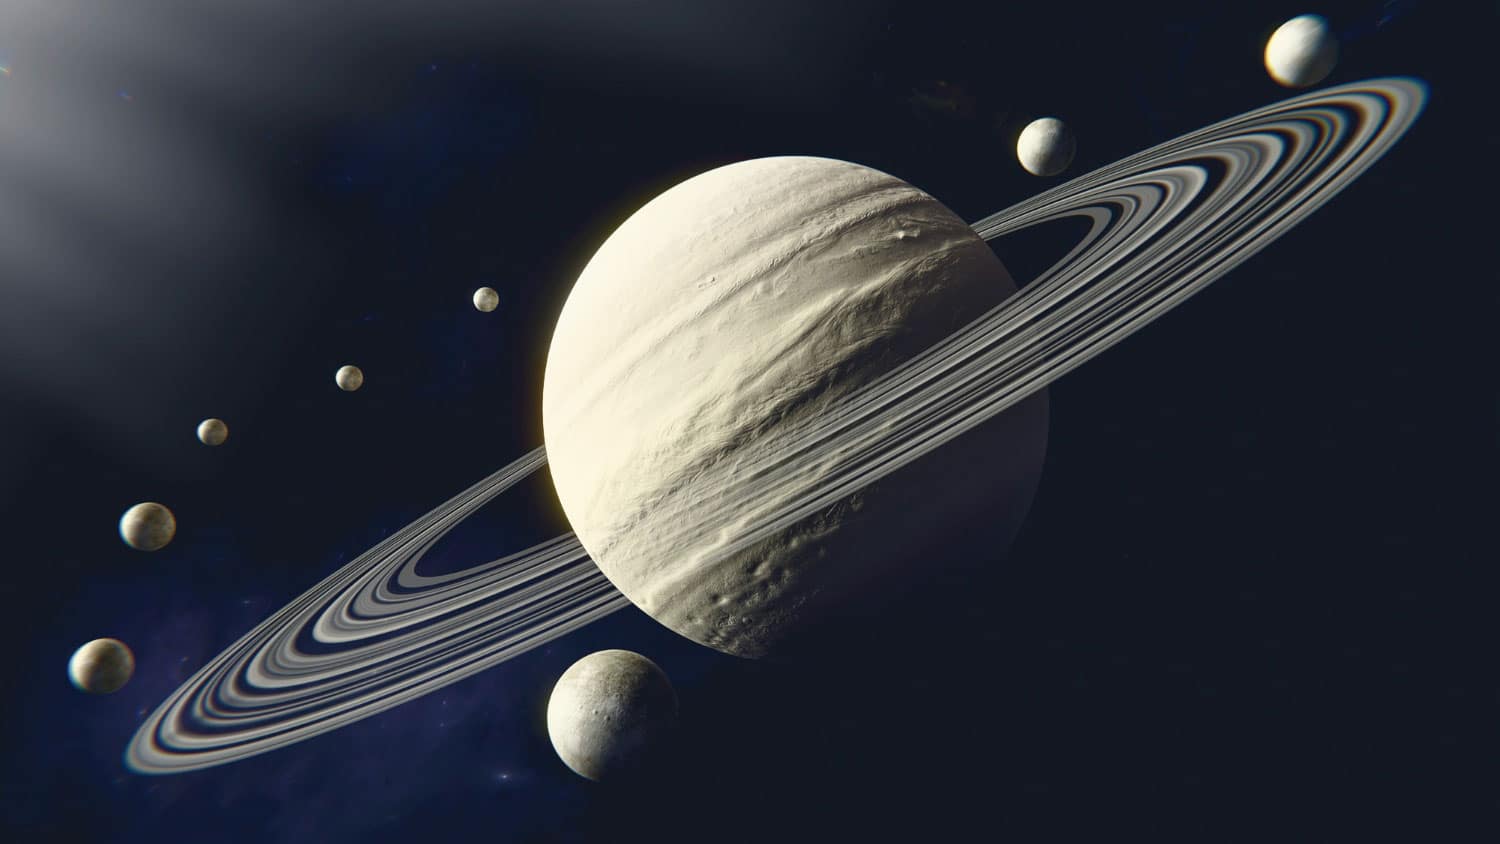 how many moons does saturn have